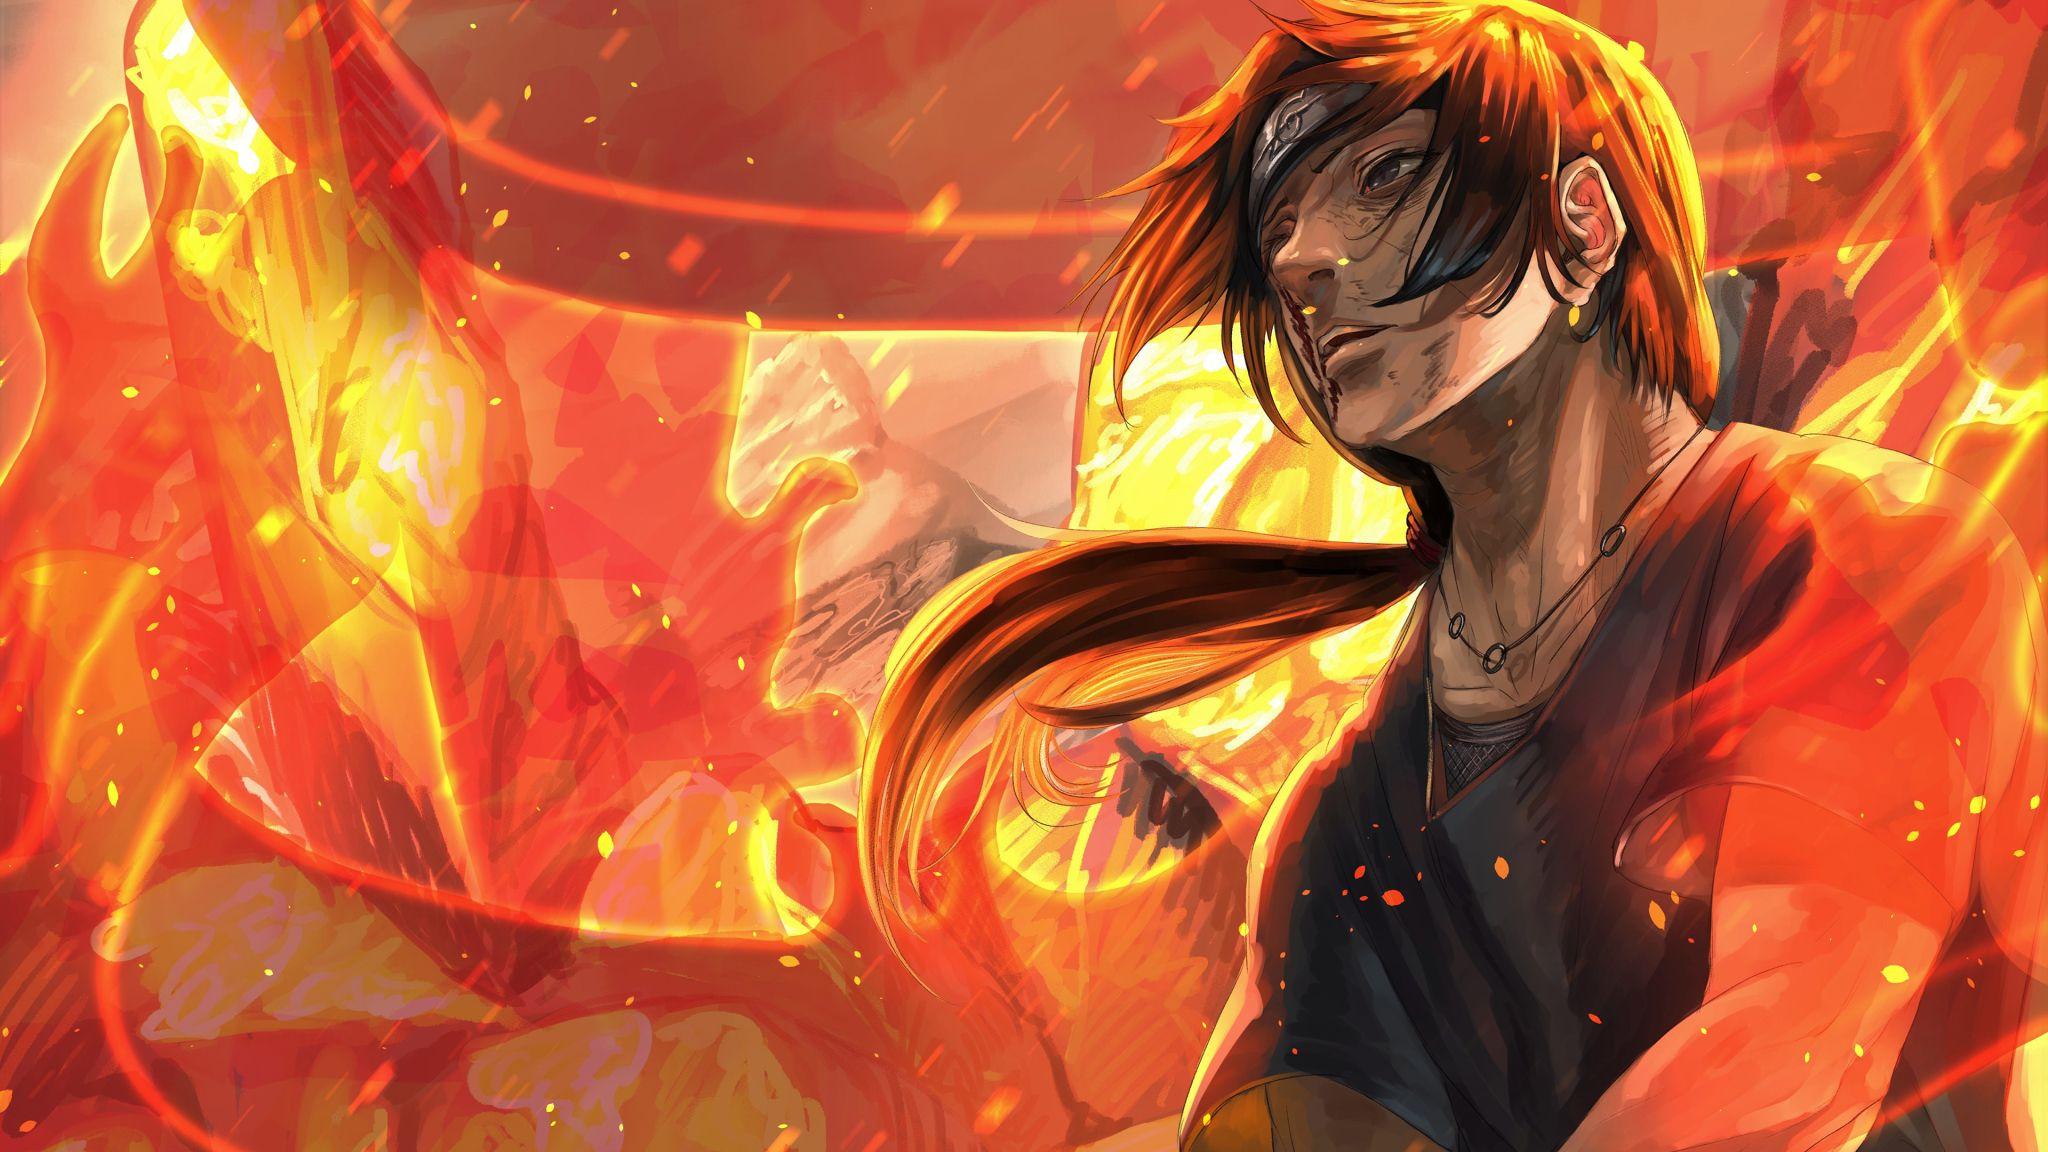 48x1152 Fire Anime Wallpapers Top Free 48x1152 Fire Anime Backgrounds Wallpaperaccess